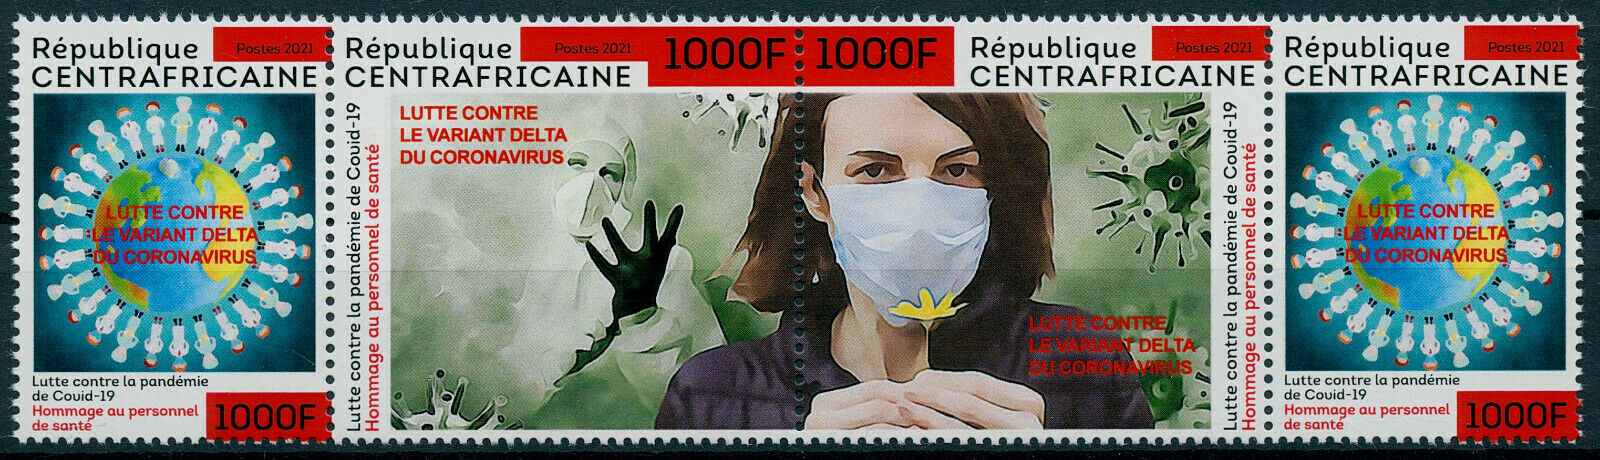 Central African Rep 2021 MNH Medical Stamps Corona Fight Delta Variant Covid Covid-19 4v Strip